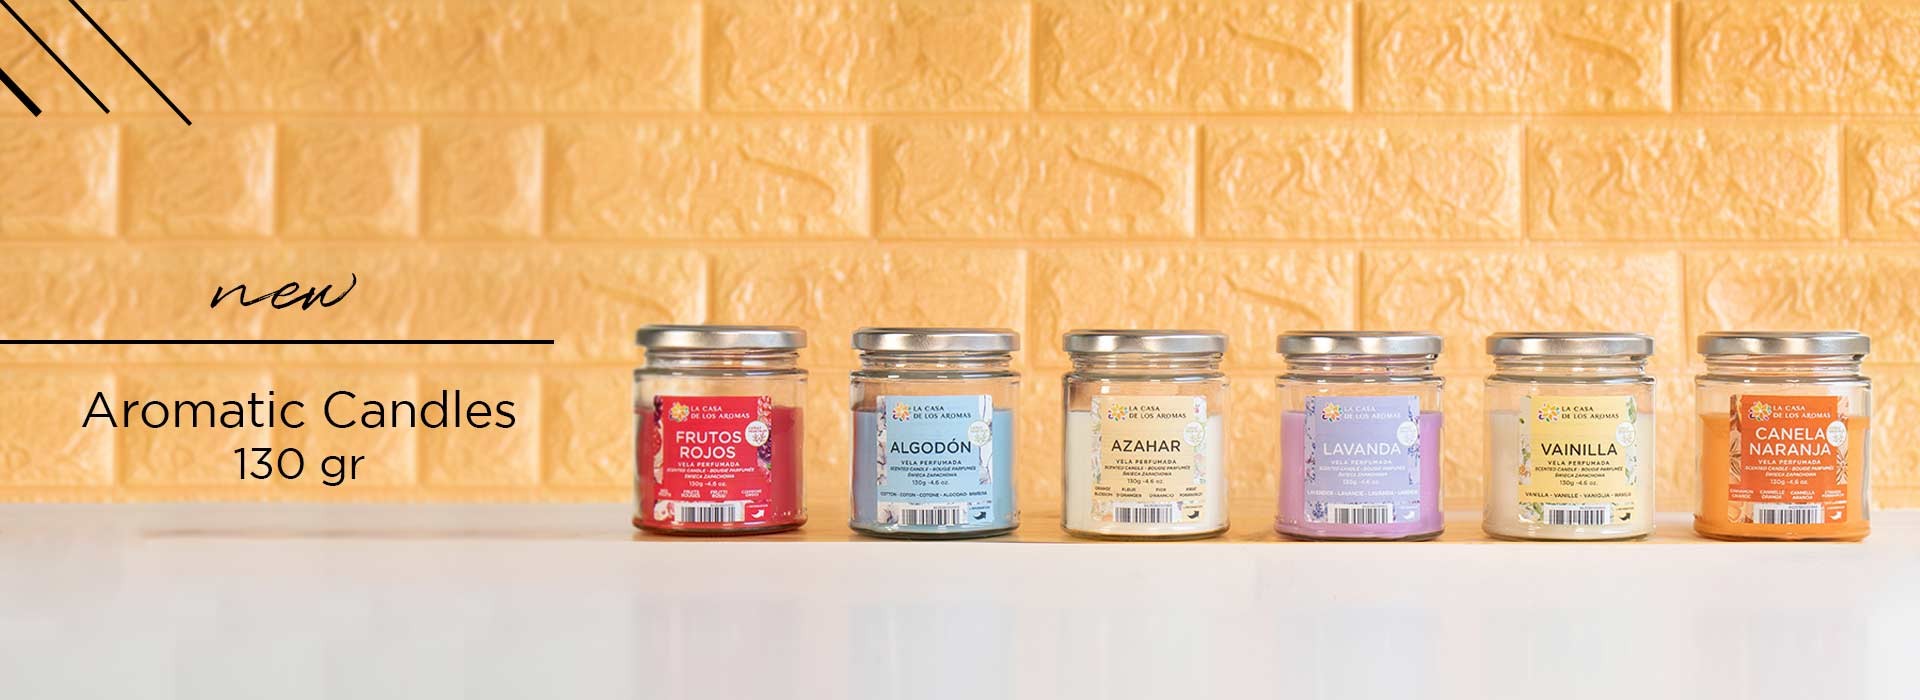 La Casa de los Aromas is one of the brands owned by the Jesús Gómez SL  group, it's the hallmark of natural scenting where innovation and  development are the building blocks in our pursuit for excellence. Our  fresh, new products lighten up the daily ...